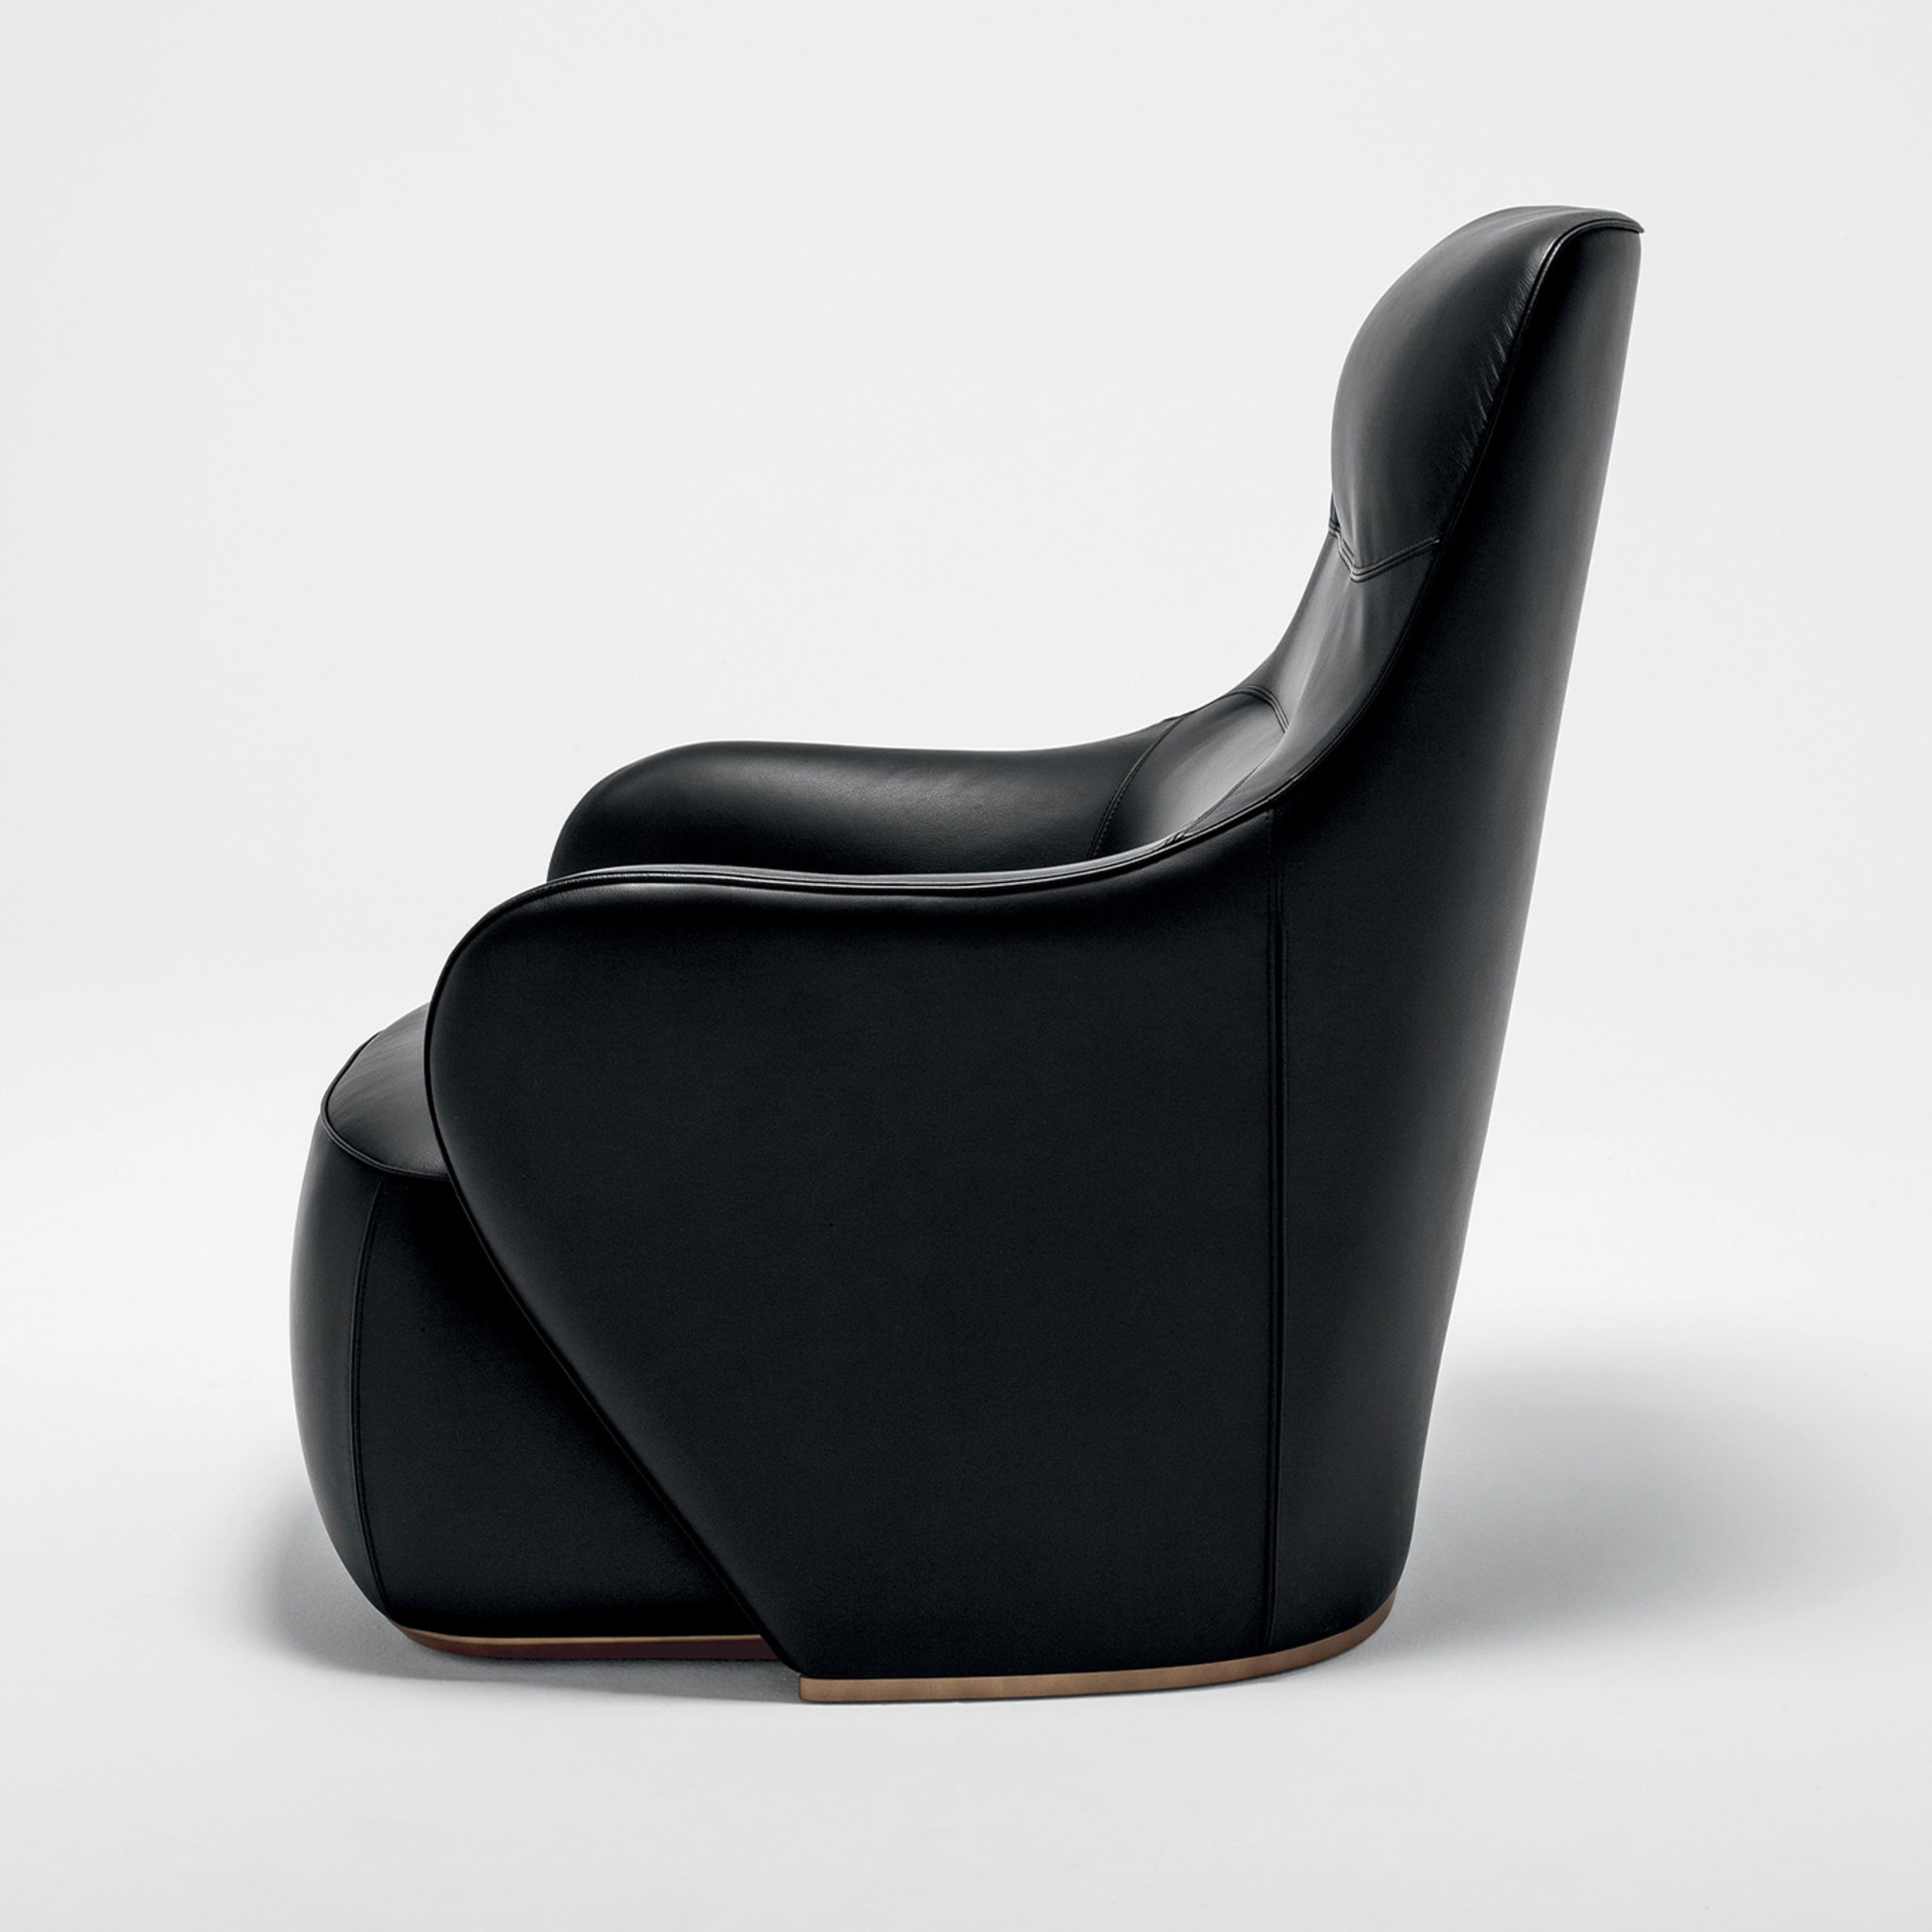 Caddy Black Armchair and Pouf - Alternative view 1